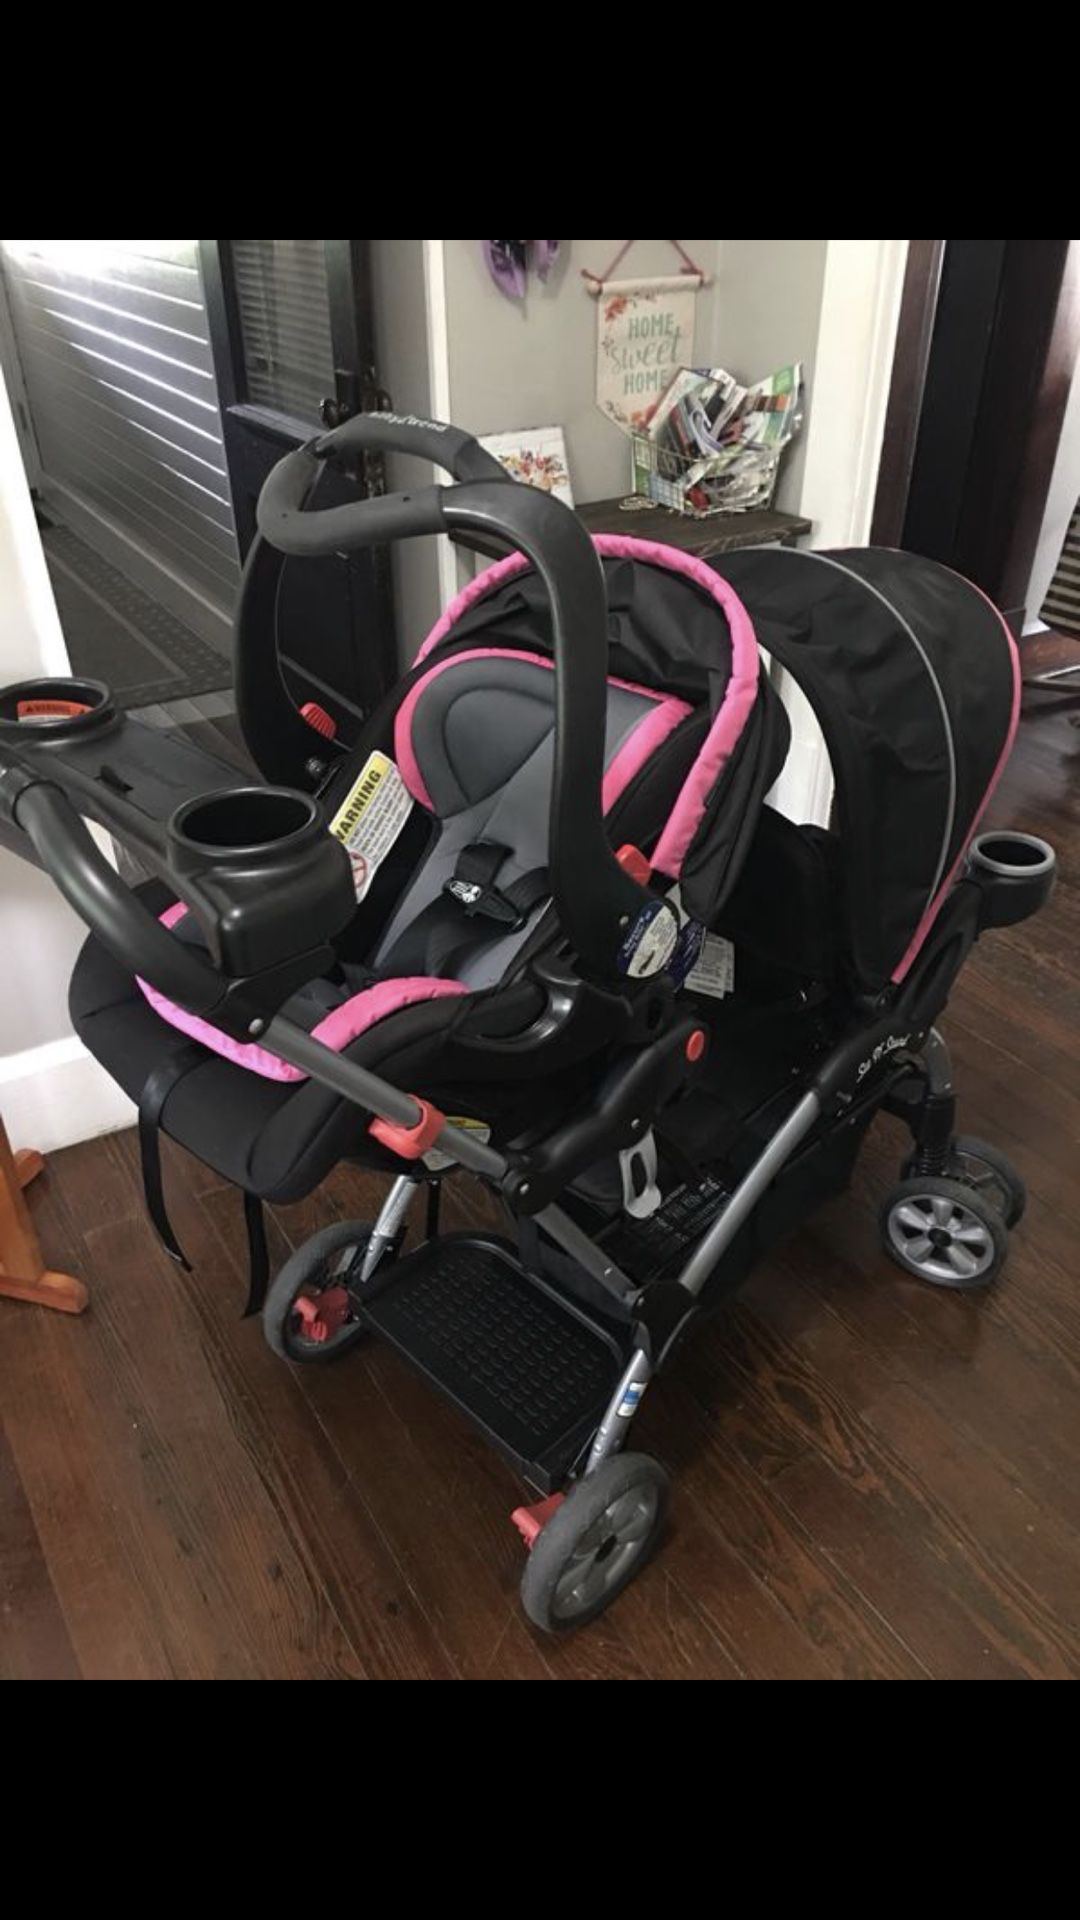 Car seat / double stroller combo